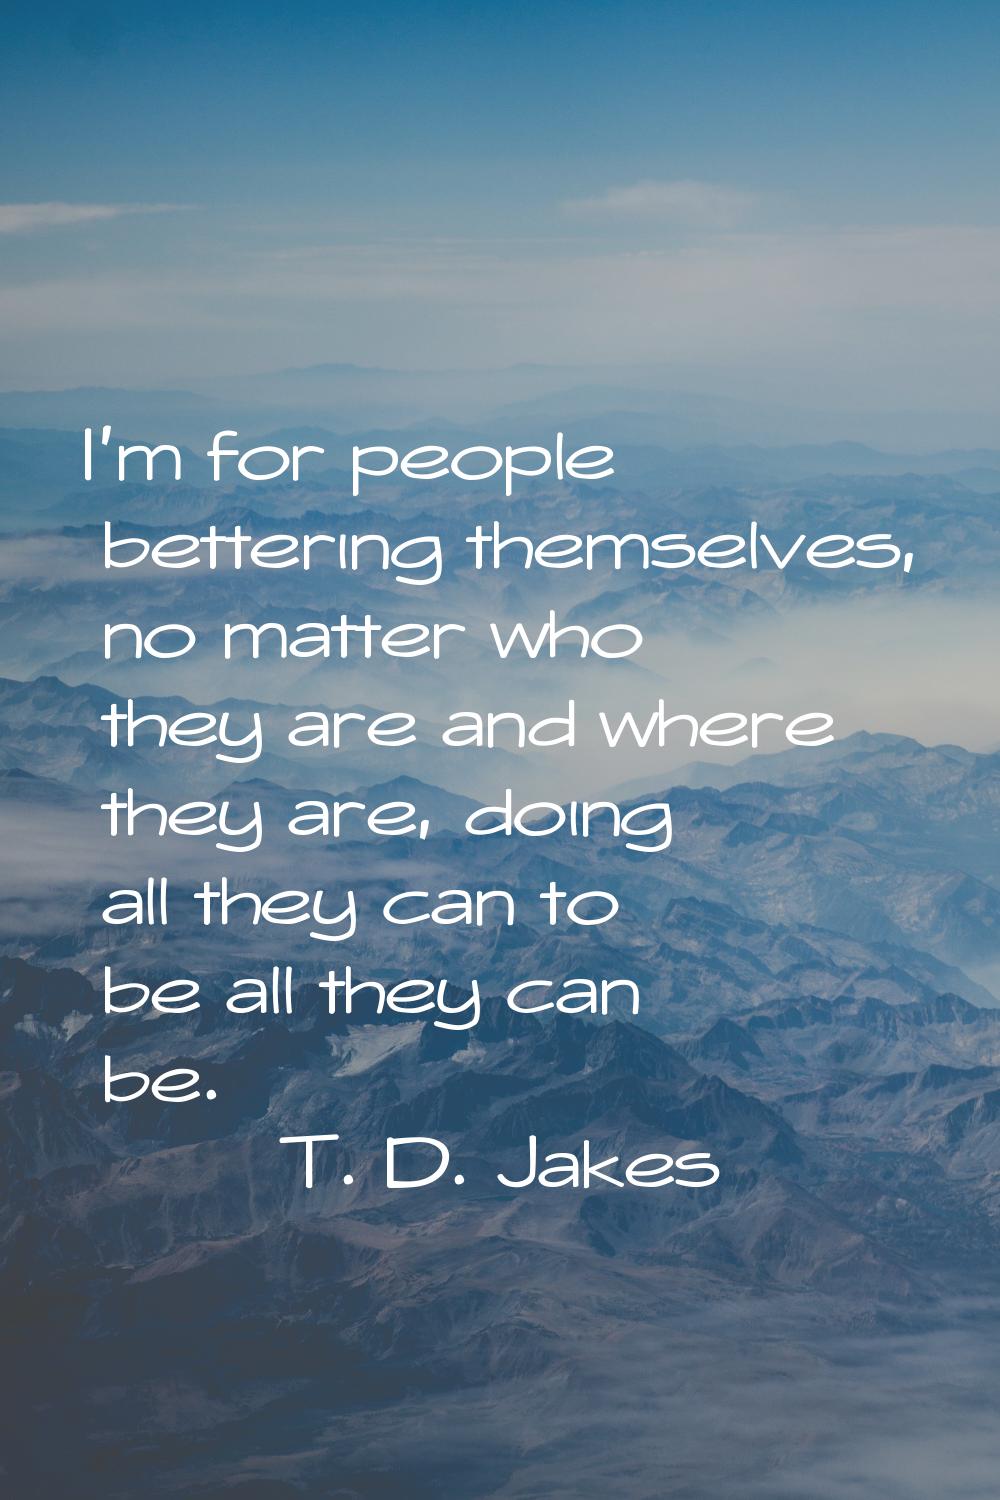 I'm for people bettering themselves, no matter who they are and where they are, doing all they can 